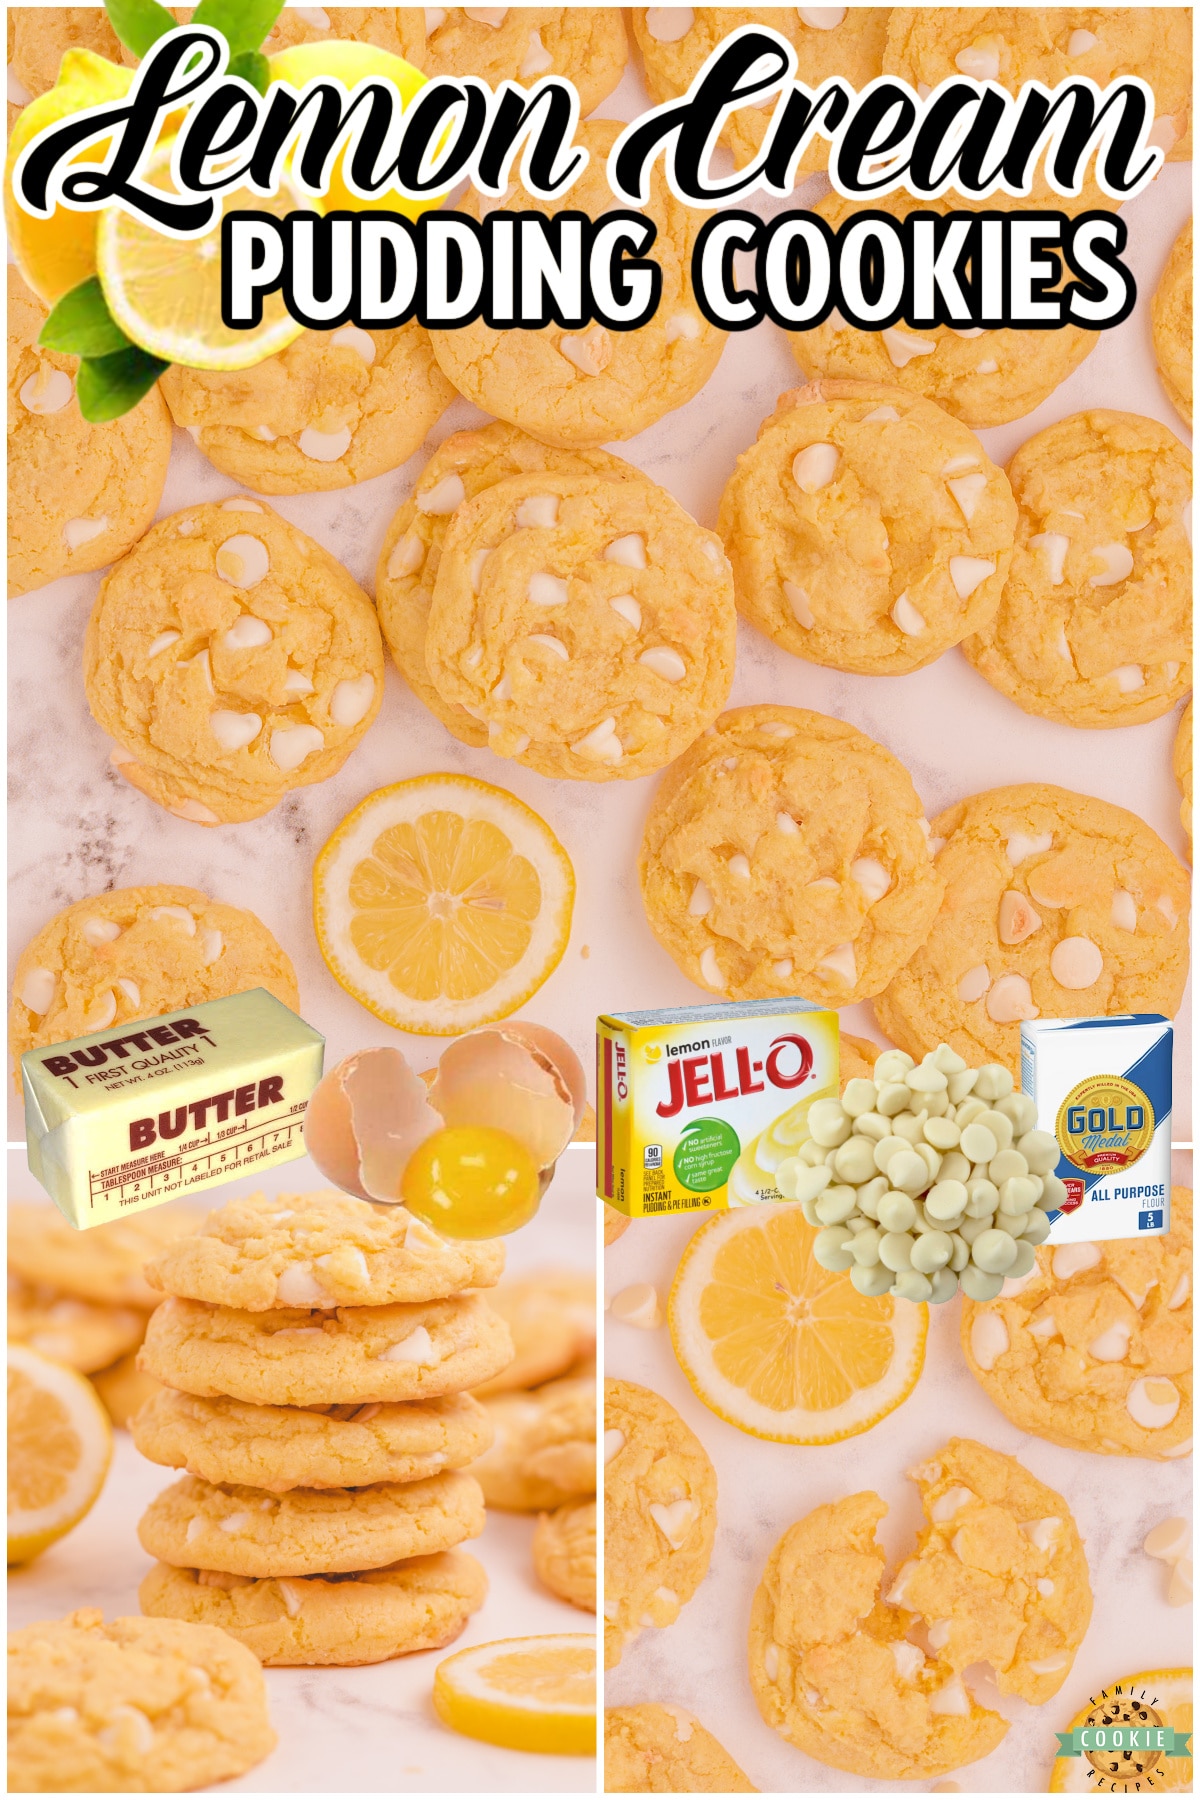 White Chocolate Chip Lemon Cookies are soft, chewy and perfectly sweet lemon cookies! Lemon pudding mix adds great lemon cream flavor and texture to these delicious spring cookies.